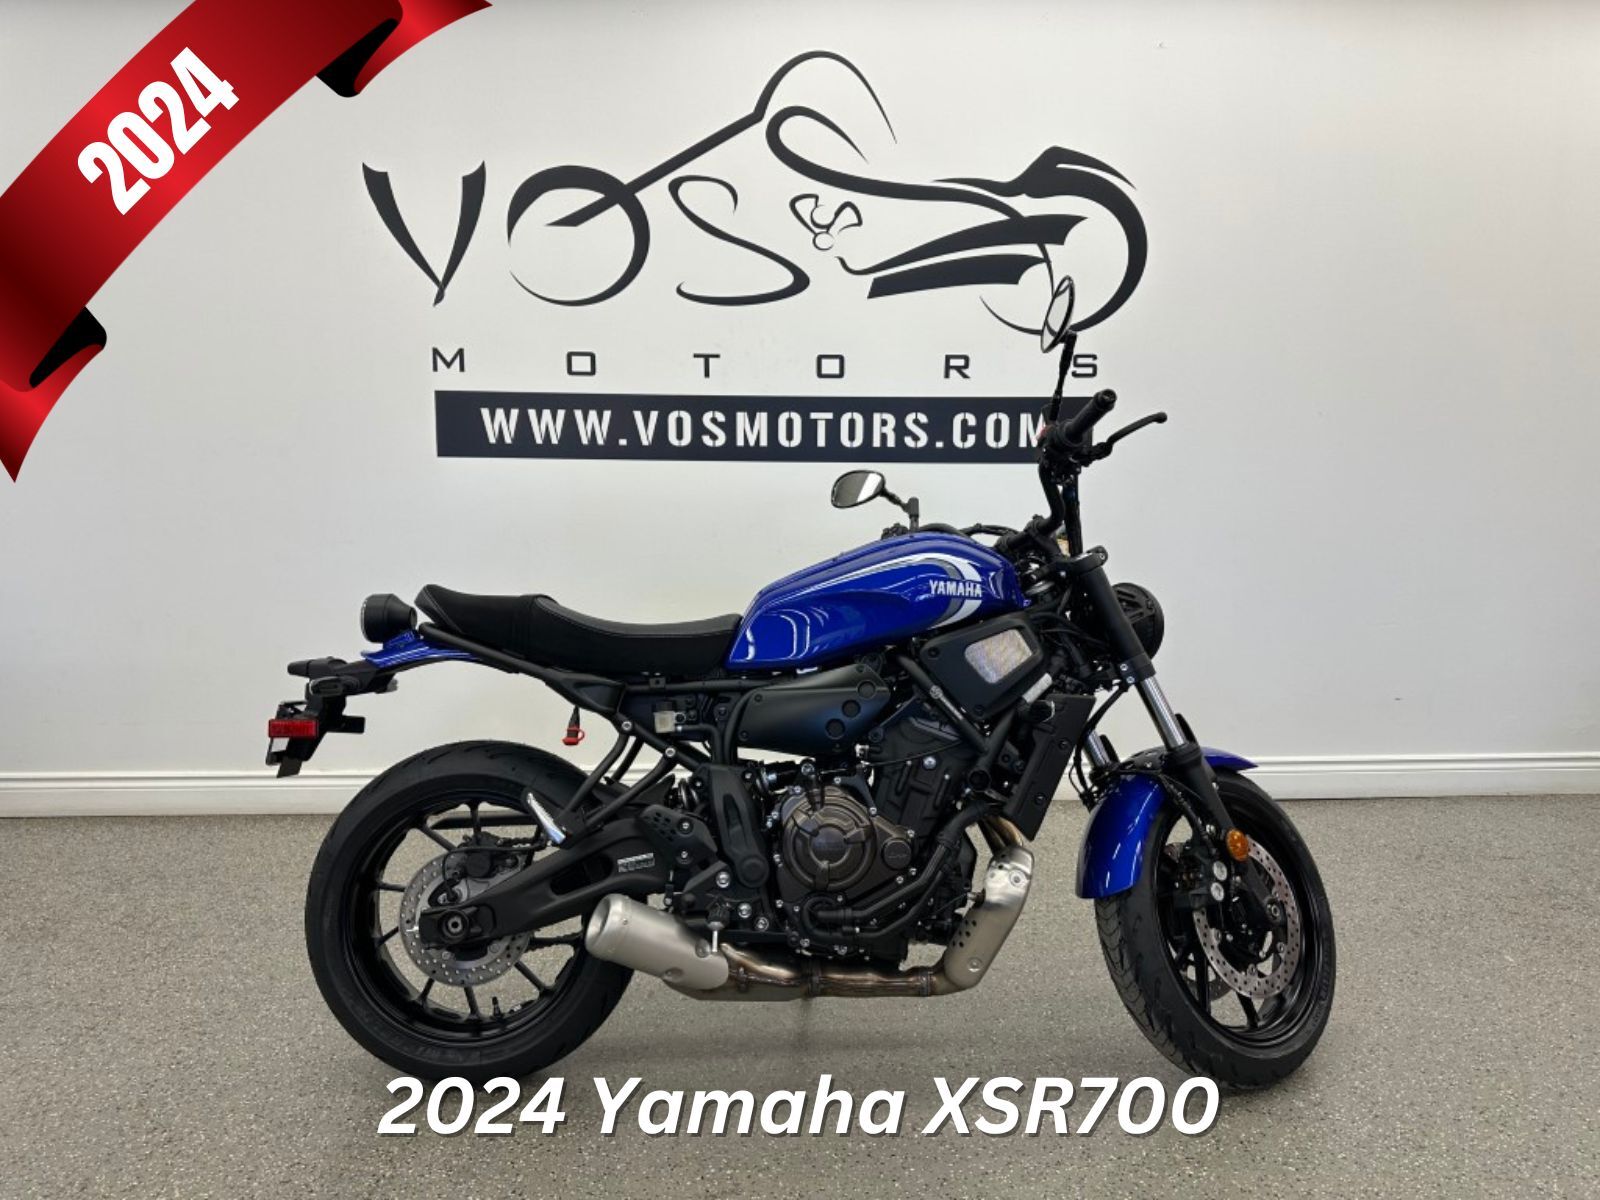 2024 Yamaha XSR700ARL XSR700 - V6061NP - -No Payments for 1 Year**